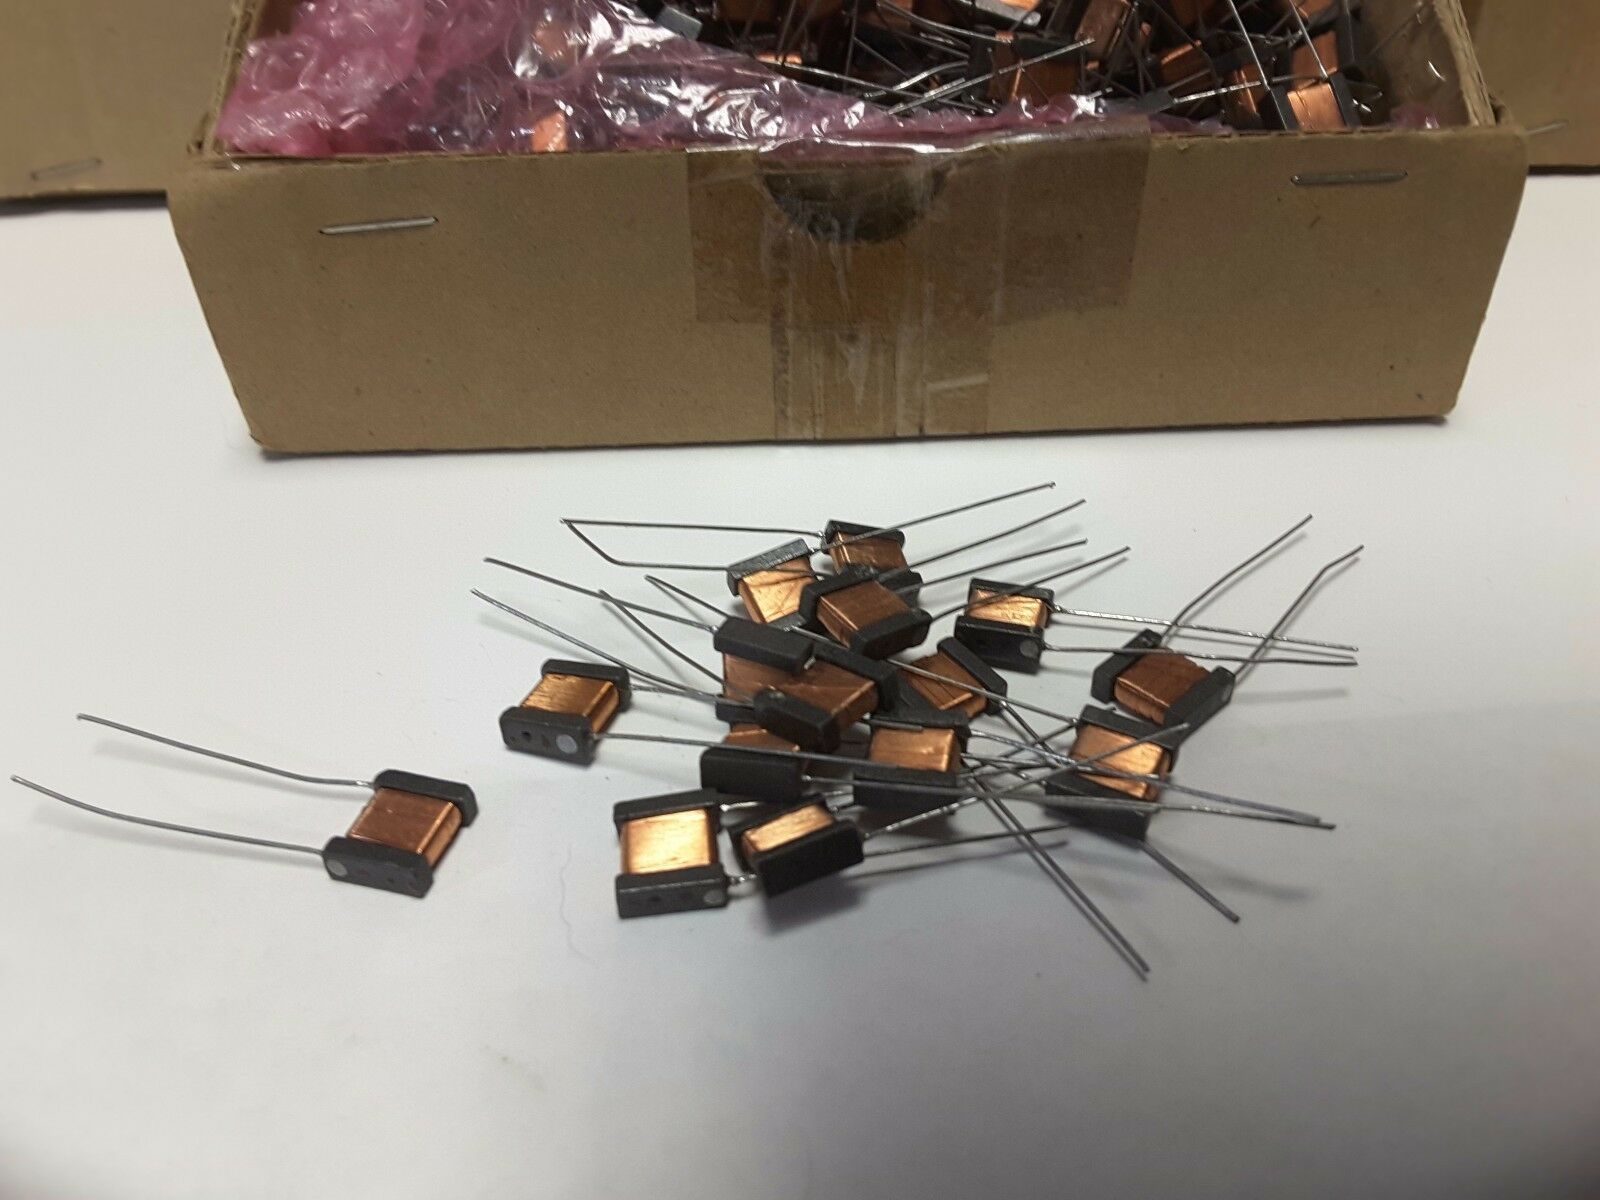 (25) Chilisin Inductor Coil Copper RCO910-102K-Y4 RC0910-102K-Y4 COPPER COIL $10 - $10.00